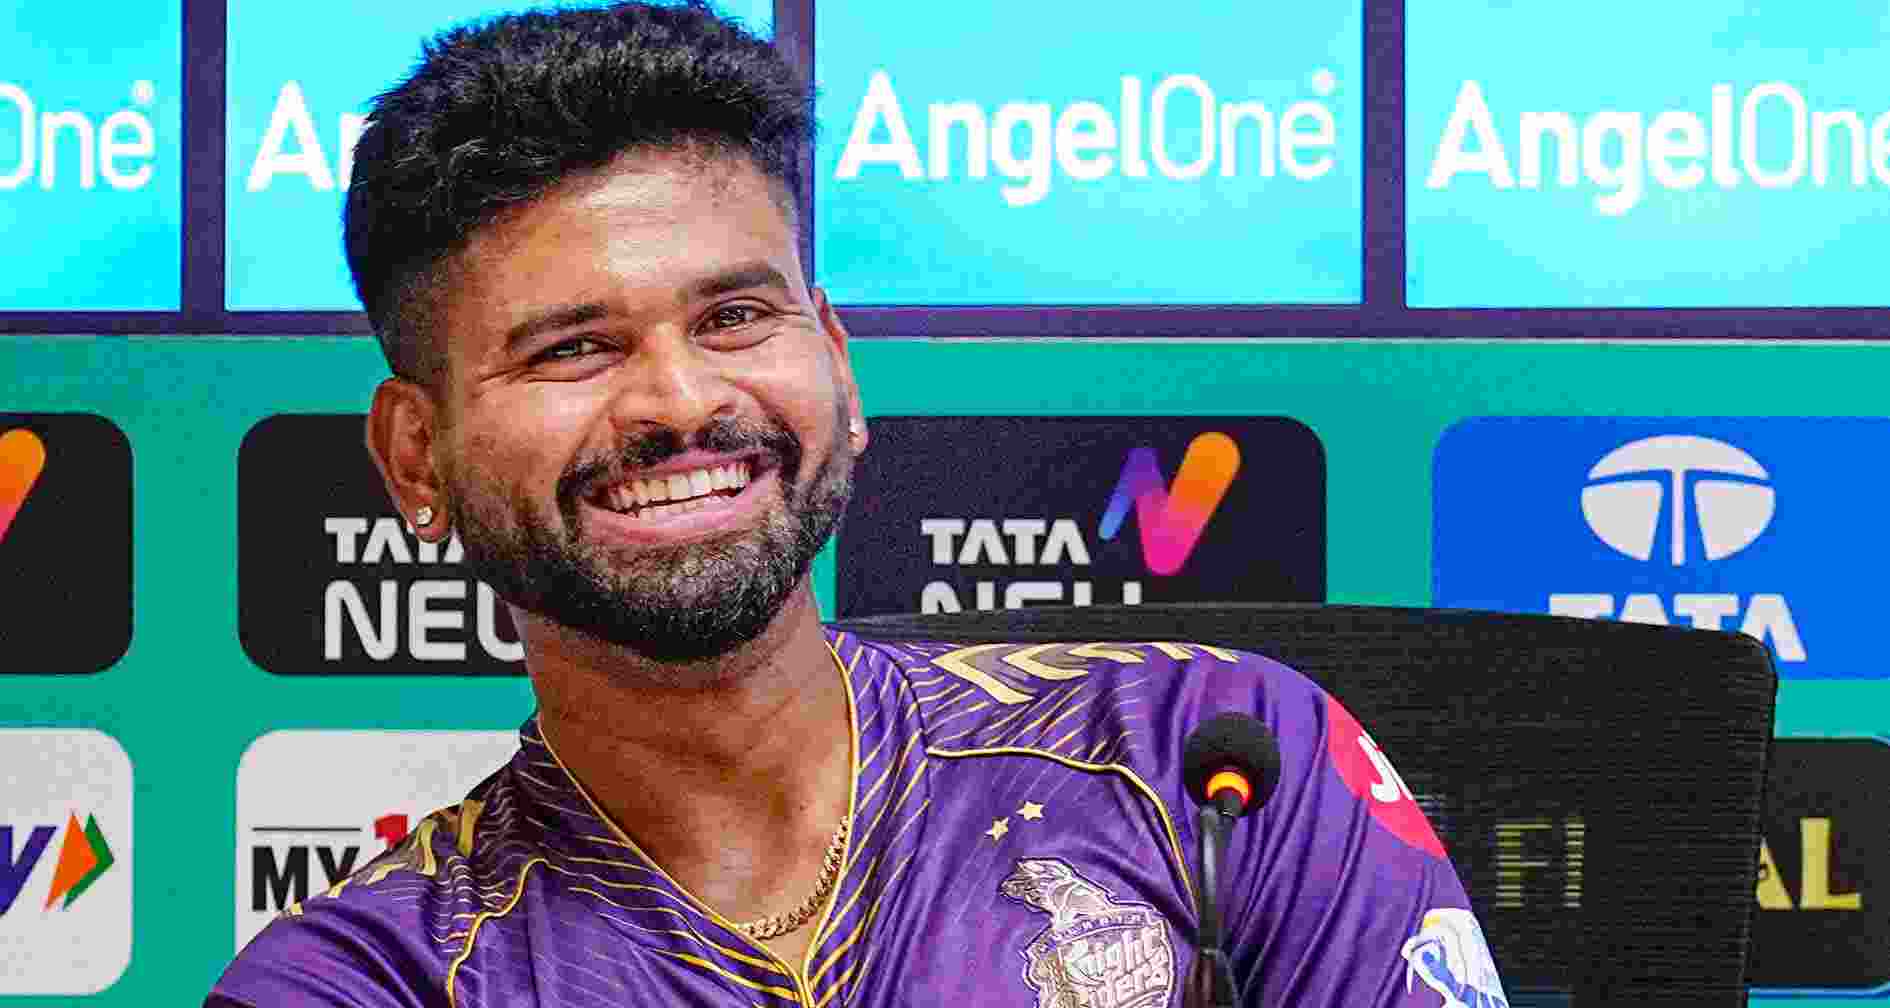 When Shreyas Iyer recreated Lionel Messi's famous World Cup celebration after lifting the IPL Trophy as Kolkata Knight Riders captain in Chennai, it was nothing short of an Argentina moment for the embattled Indian cricketer at an individual level.